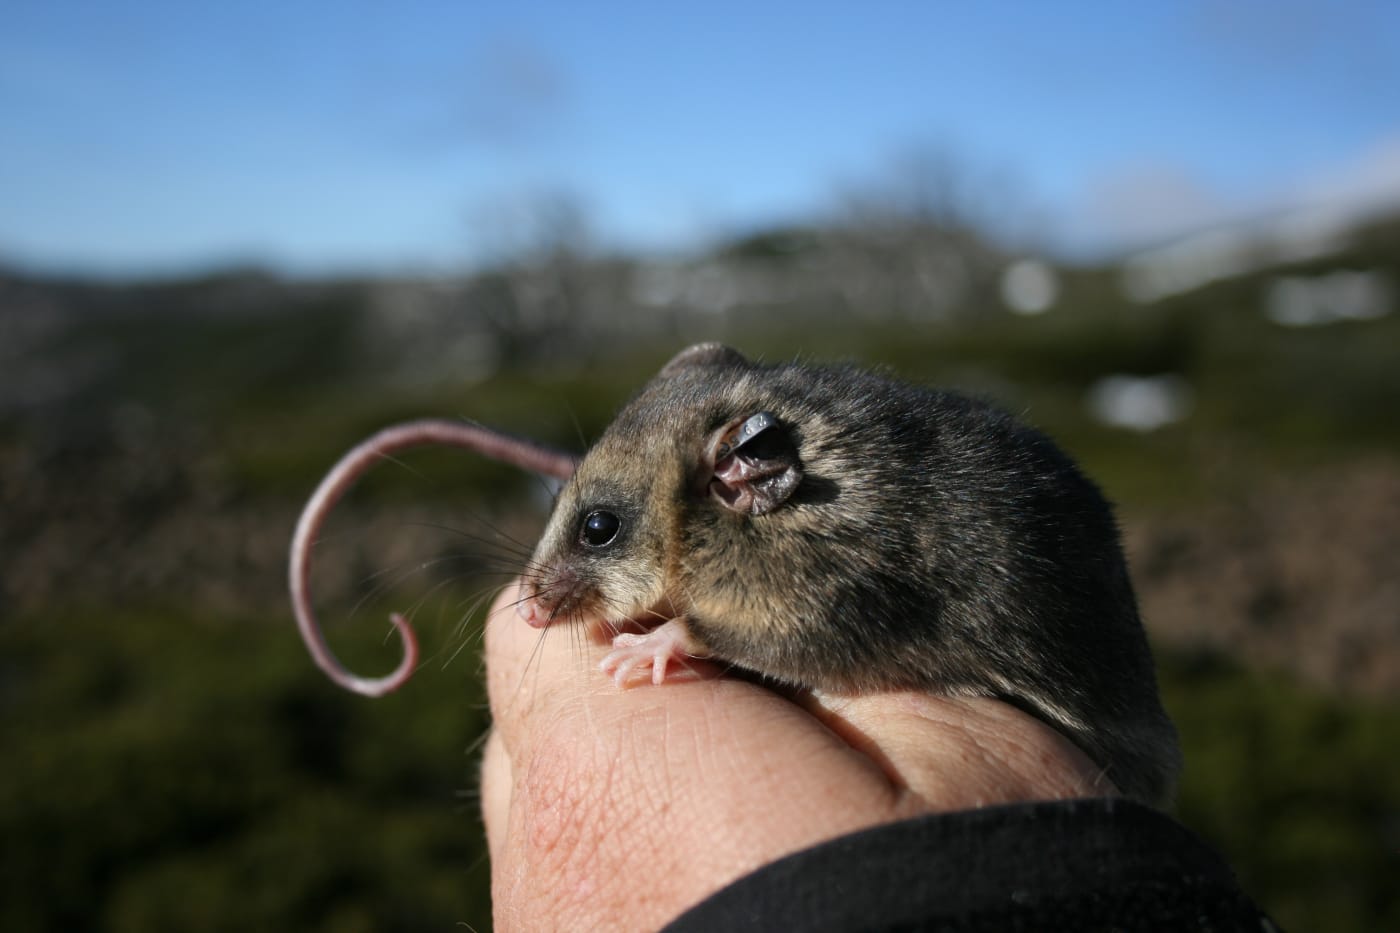 The mountain pygmy possum (Burramys parvus) is listed as Critically Endangered under the IUCN Red List. This Australian marsupial is endemic to southeastern Australia.